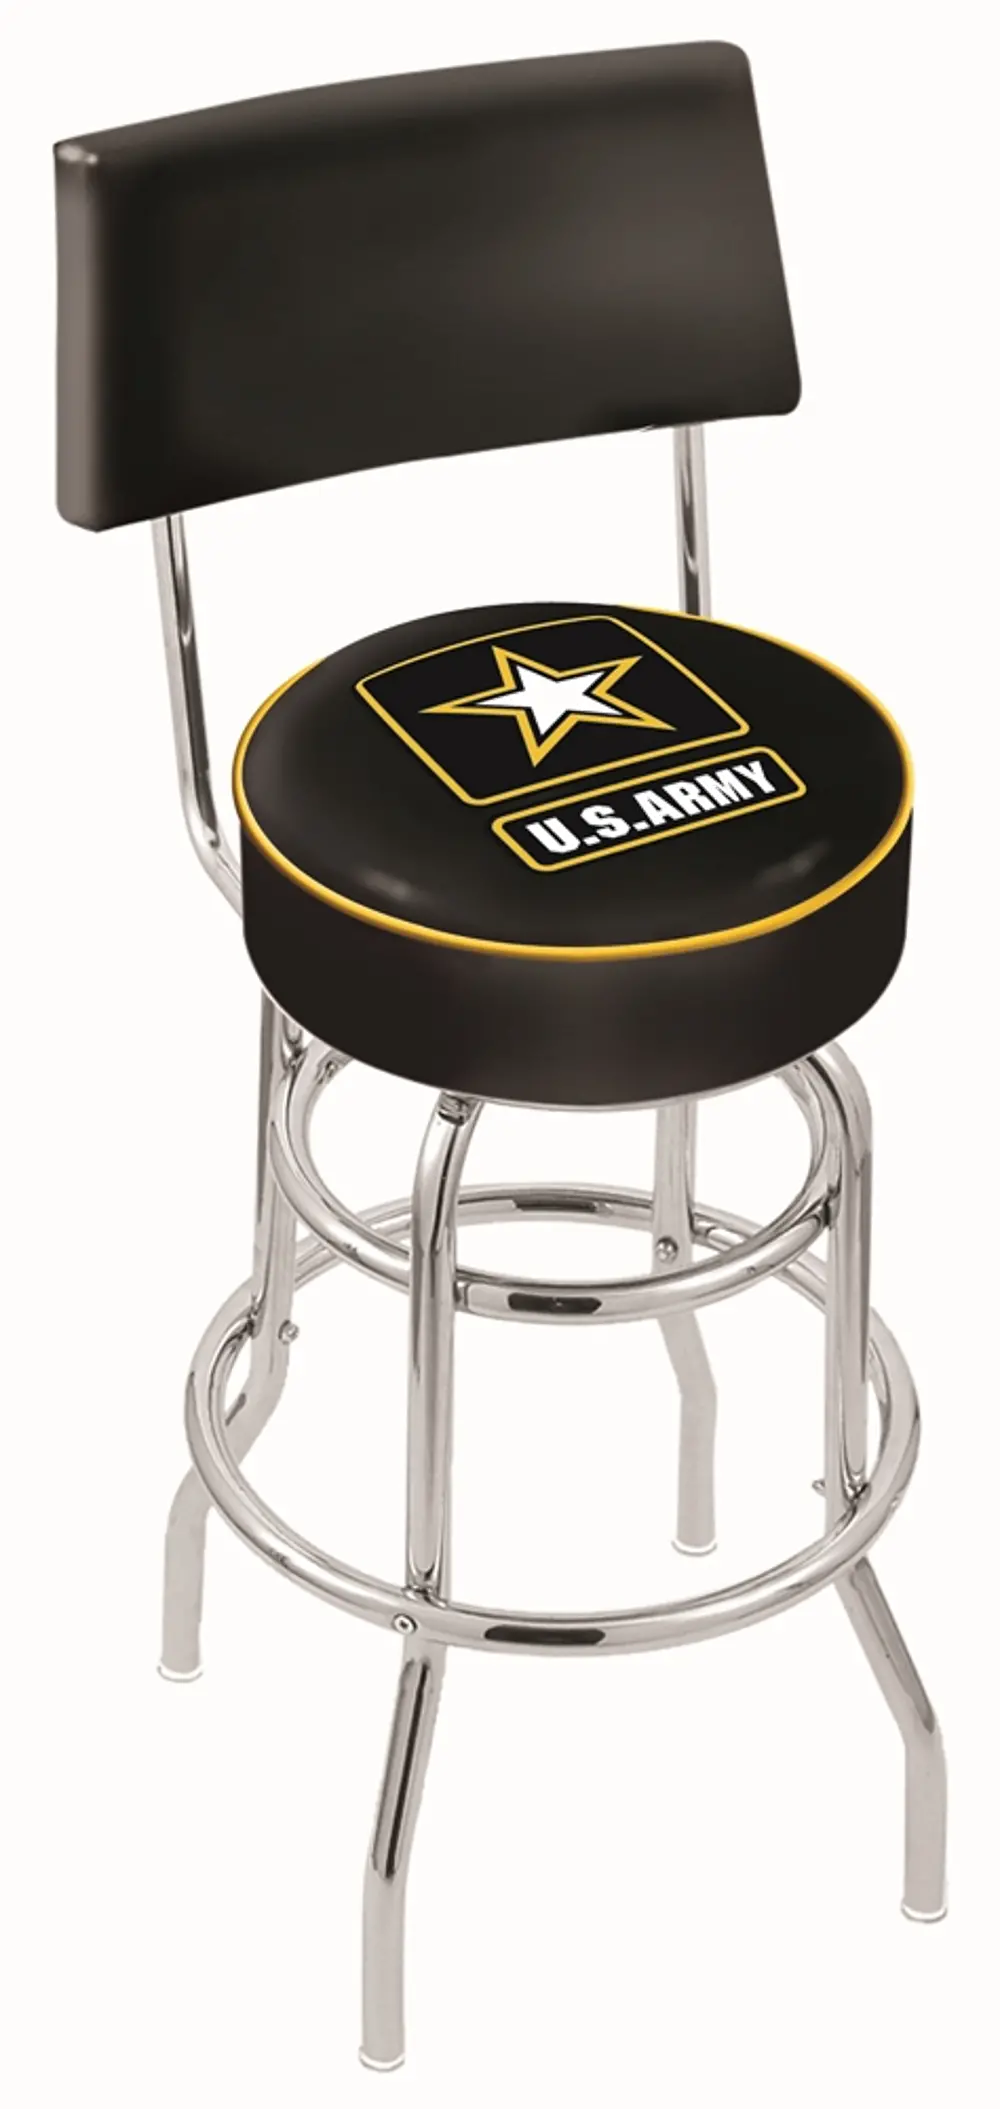 25 Inch Back Rest Swivel Counter Stool - US Army-1